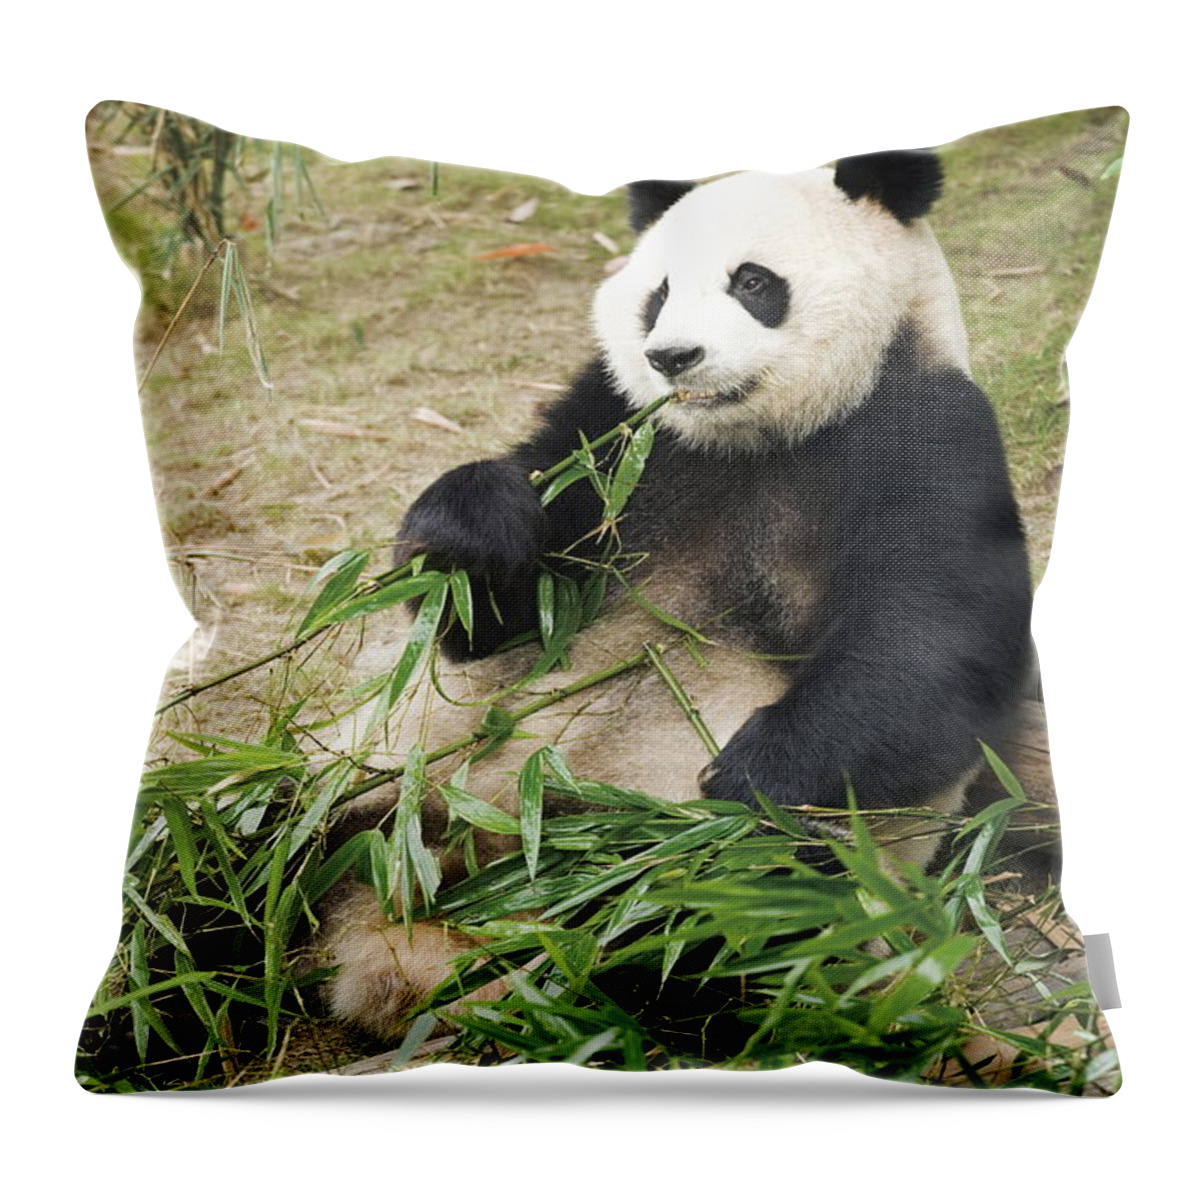 Bamboo Throw Pillow featuring the photograph Giant Panda Eating Bamboo Leaves, China by Gyro Photography/amanaimagesrf